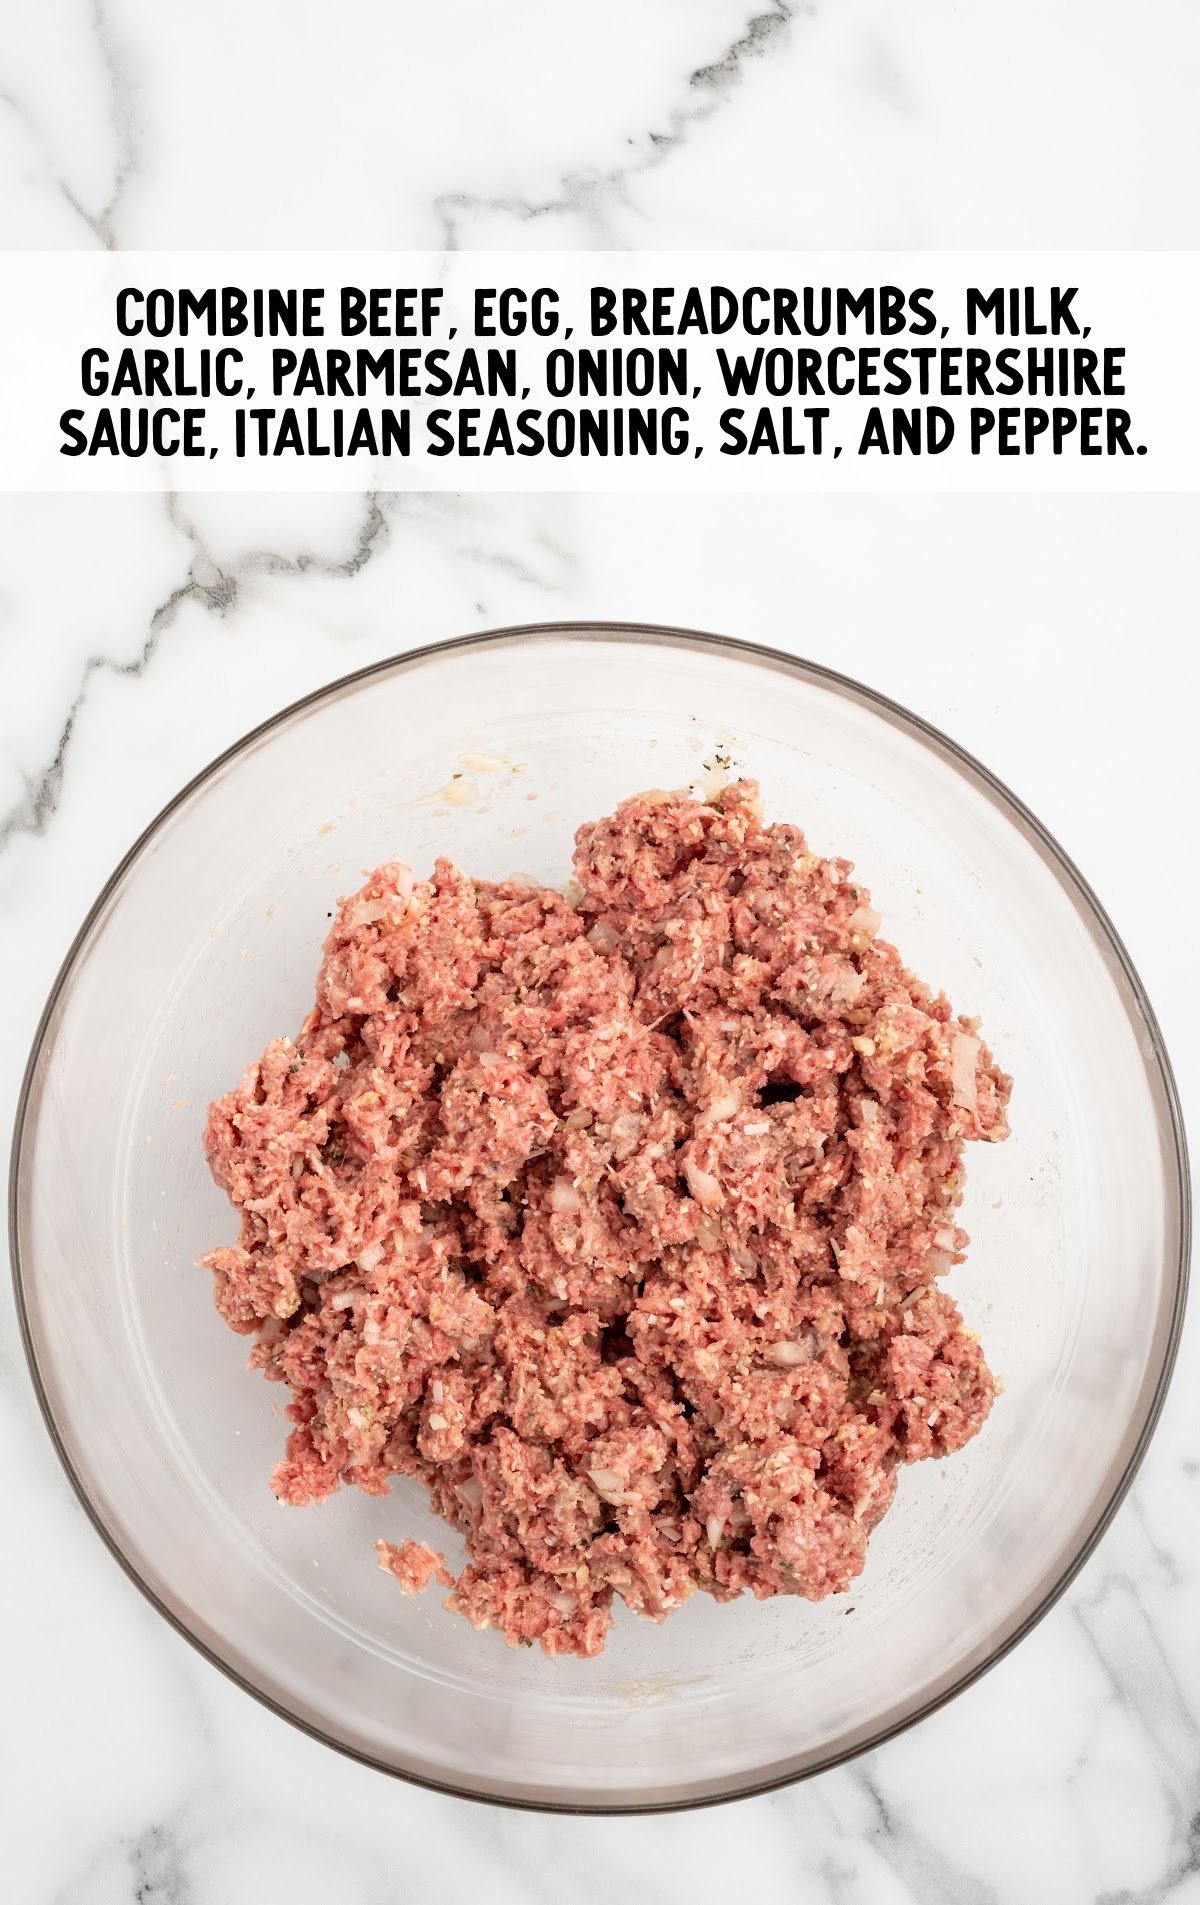 ground beef, finely diced yellow onion, breadcrumbs, minced garlic, egg, ketchup, mustard, Worcestershire sauce, salt, pepper, and chopped parsley added to a large bowl